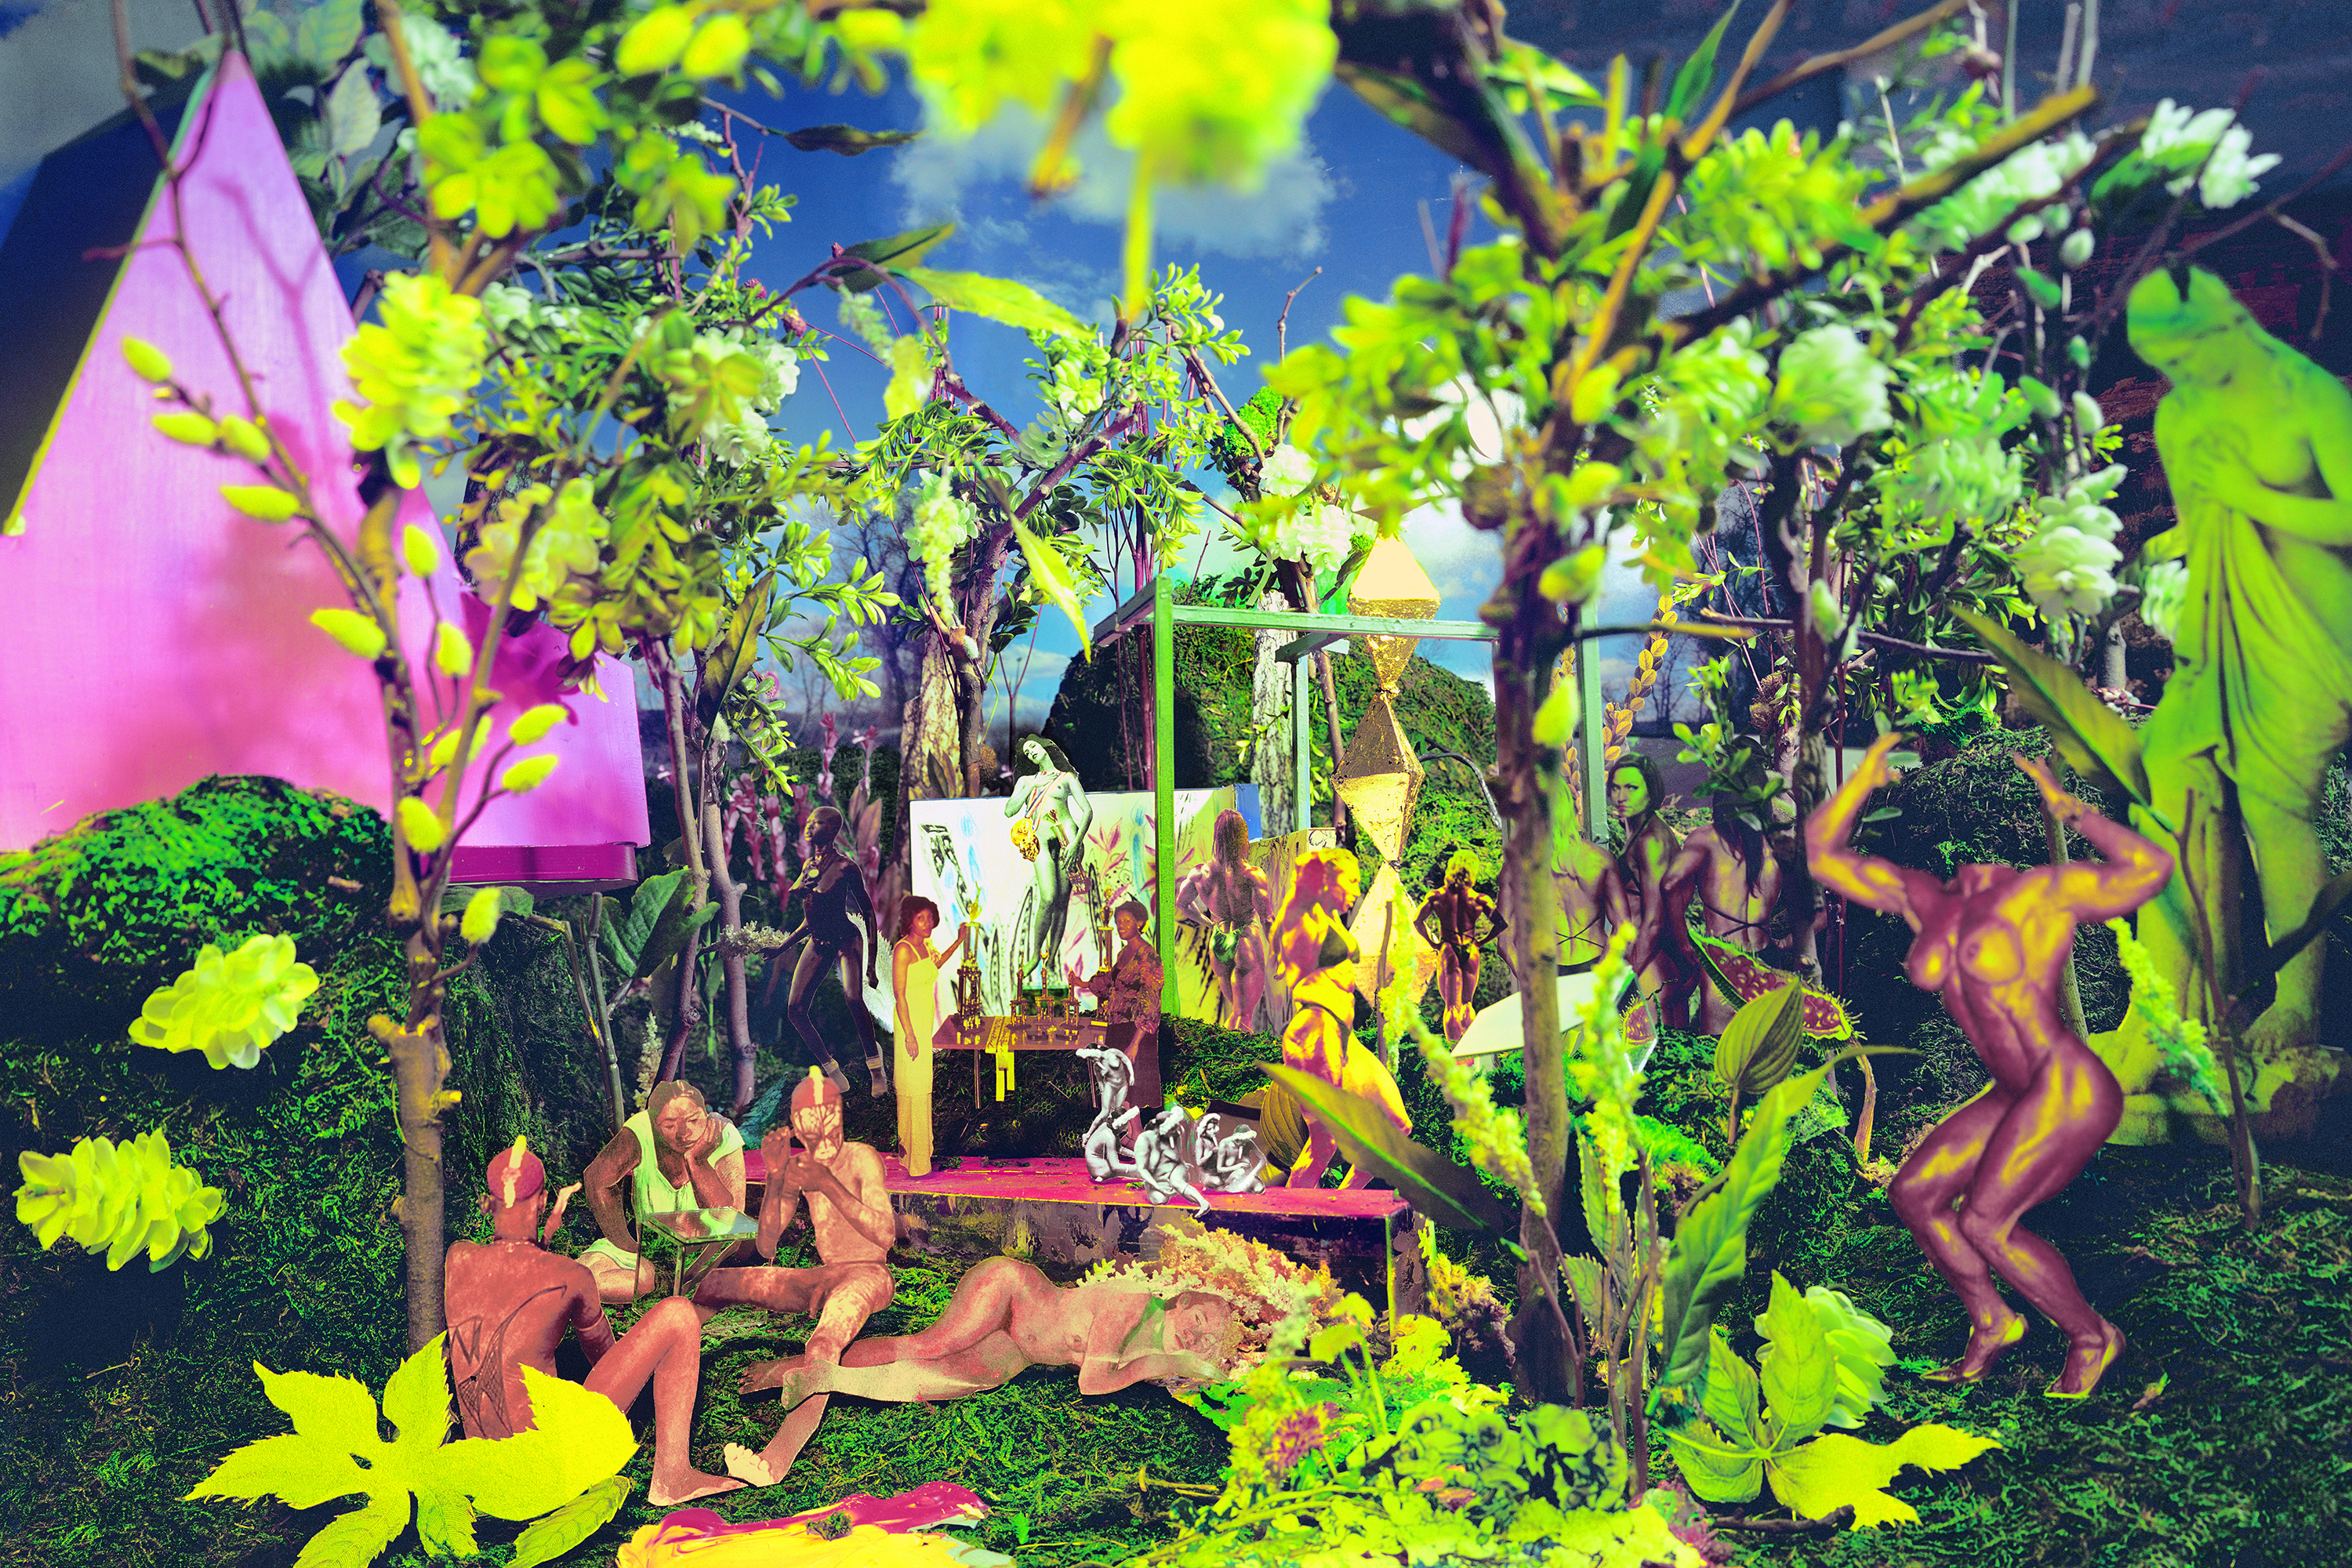 digital print with collaged imagery of nude people in a lush green forest